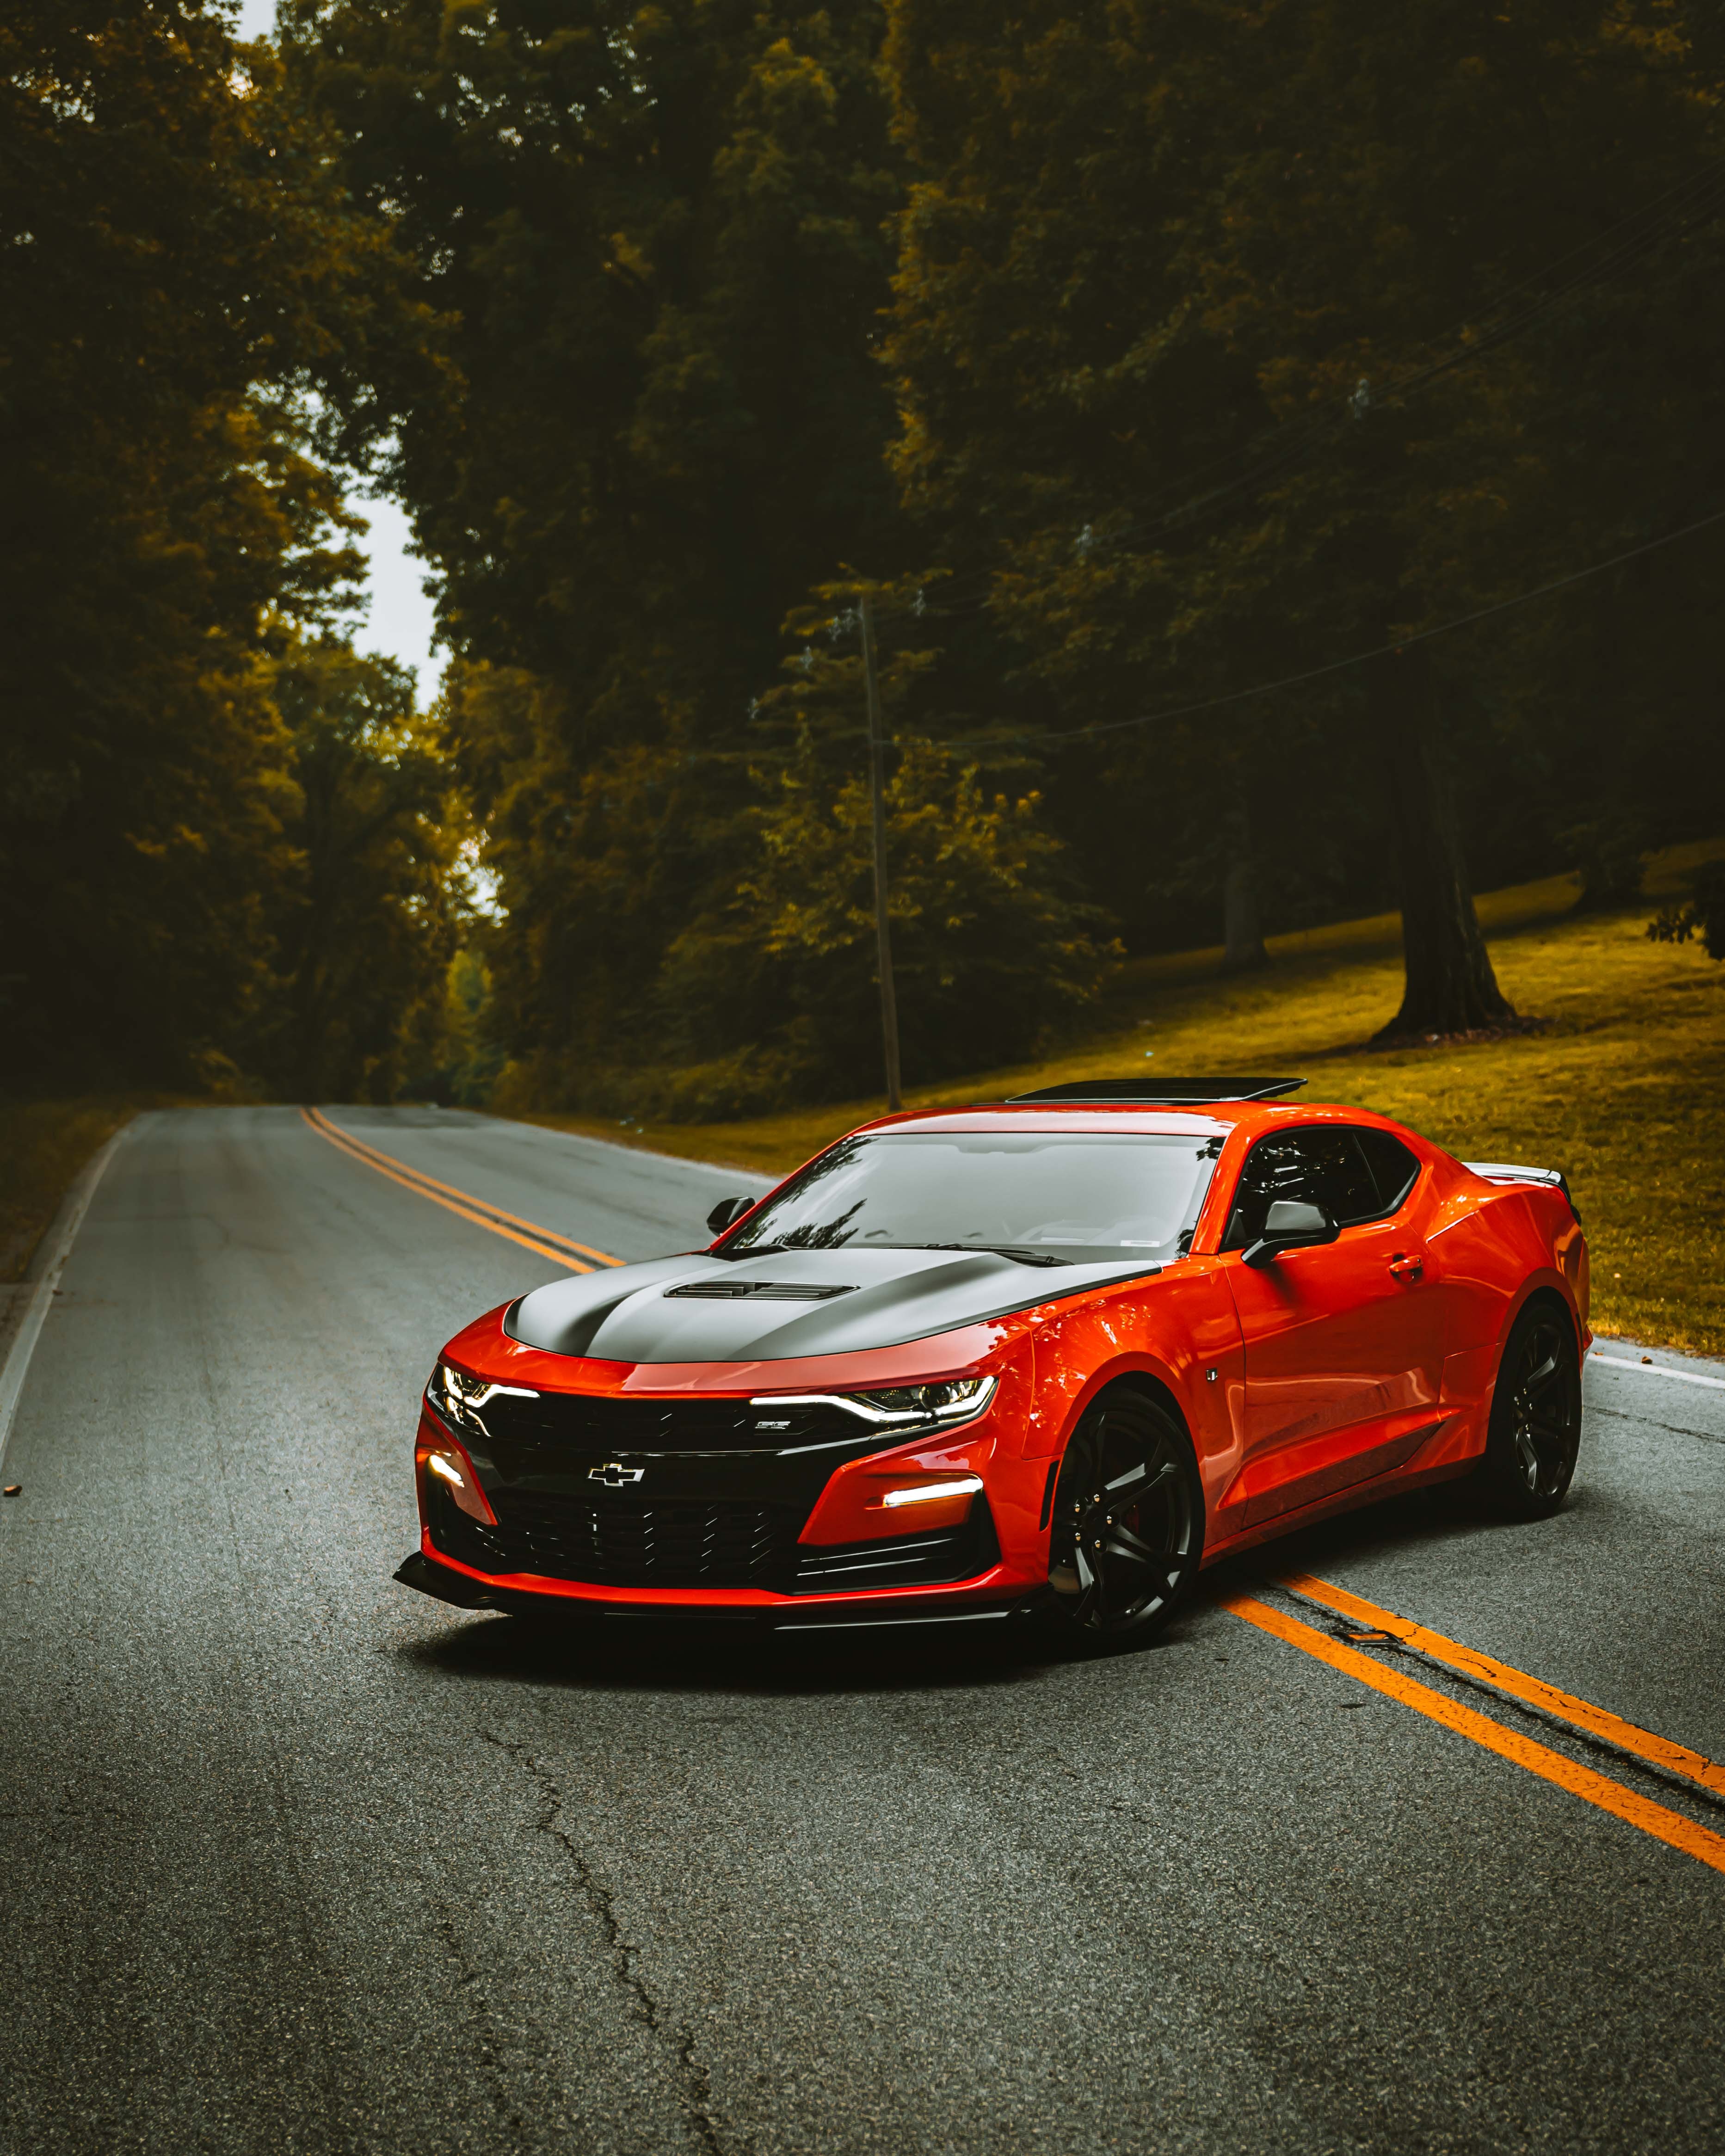 cars, car, chevrolet camaro, machine, sports car, chevrolet, sports, red, road cell phone wallpapers